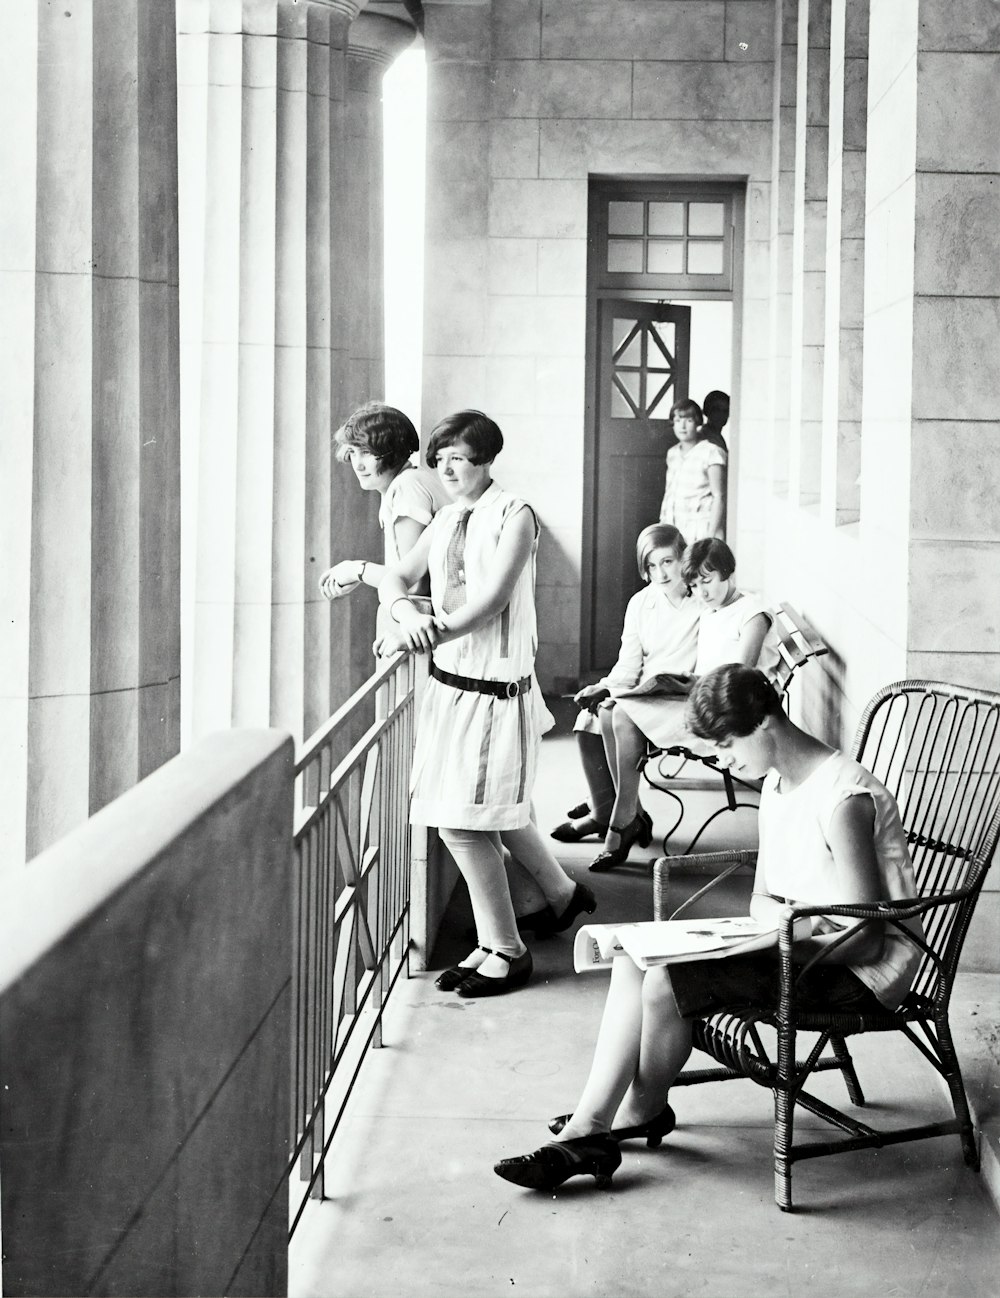 group of woman sitting and standing beside railing